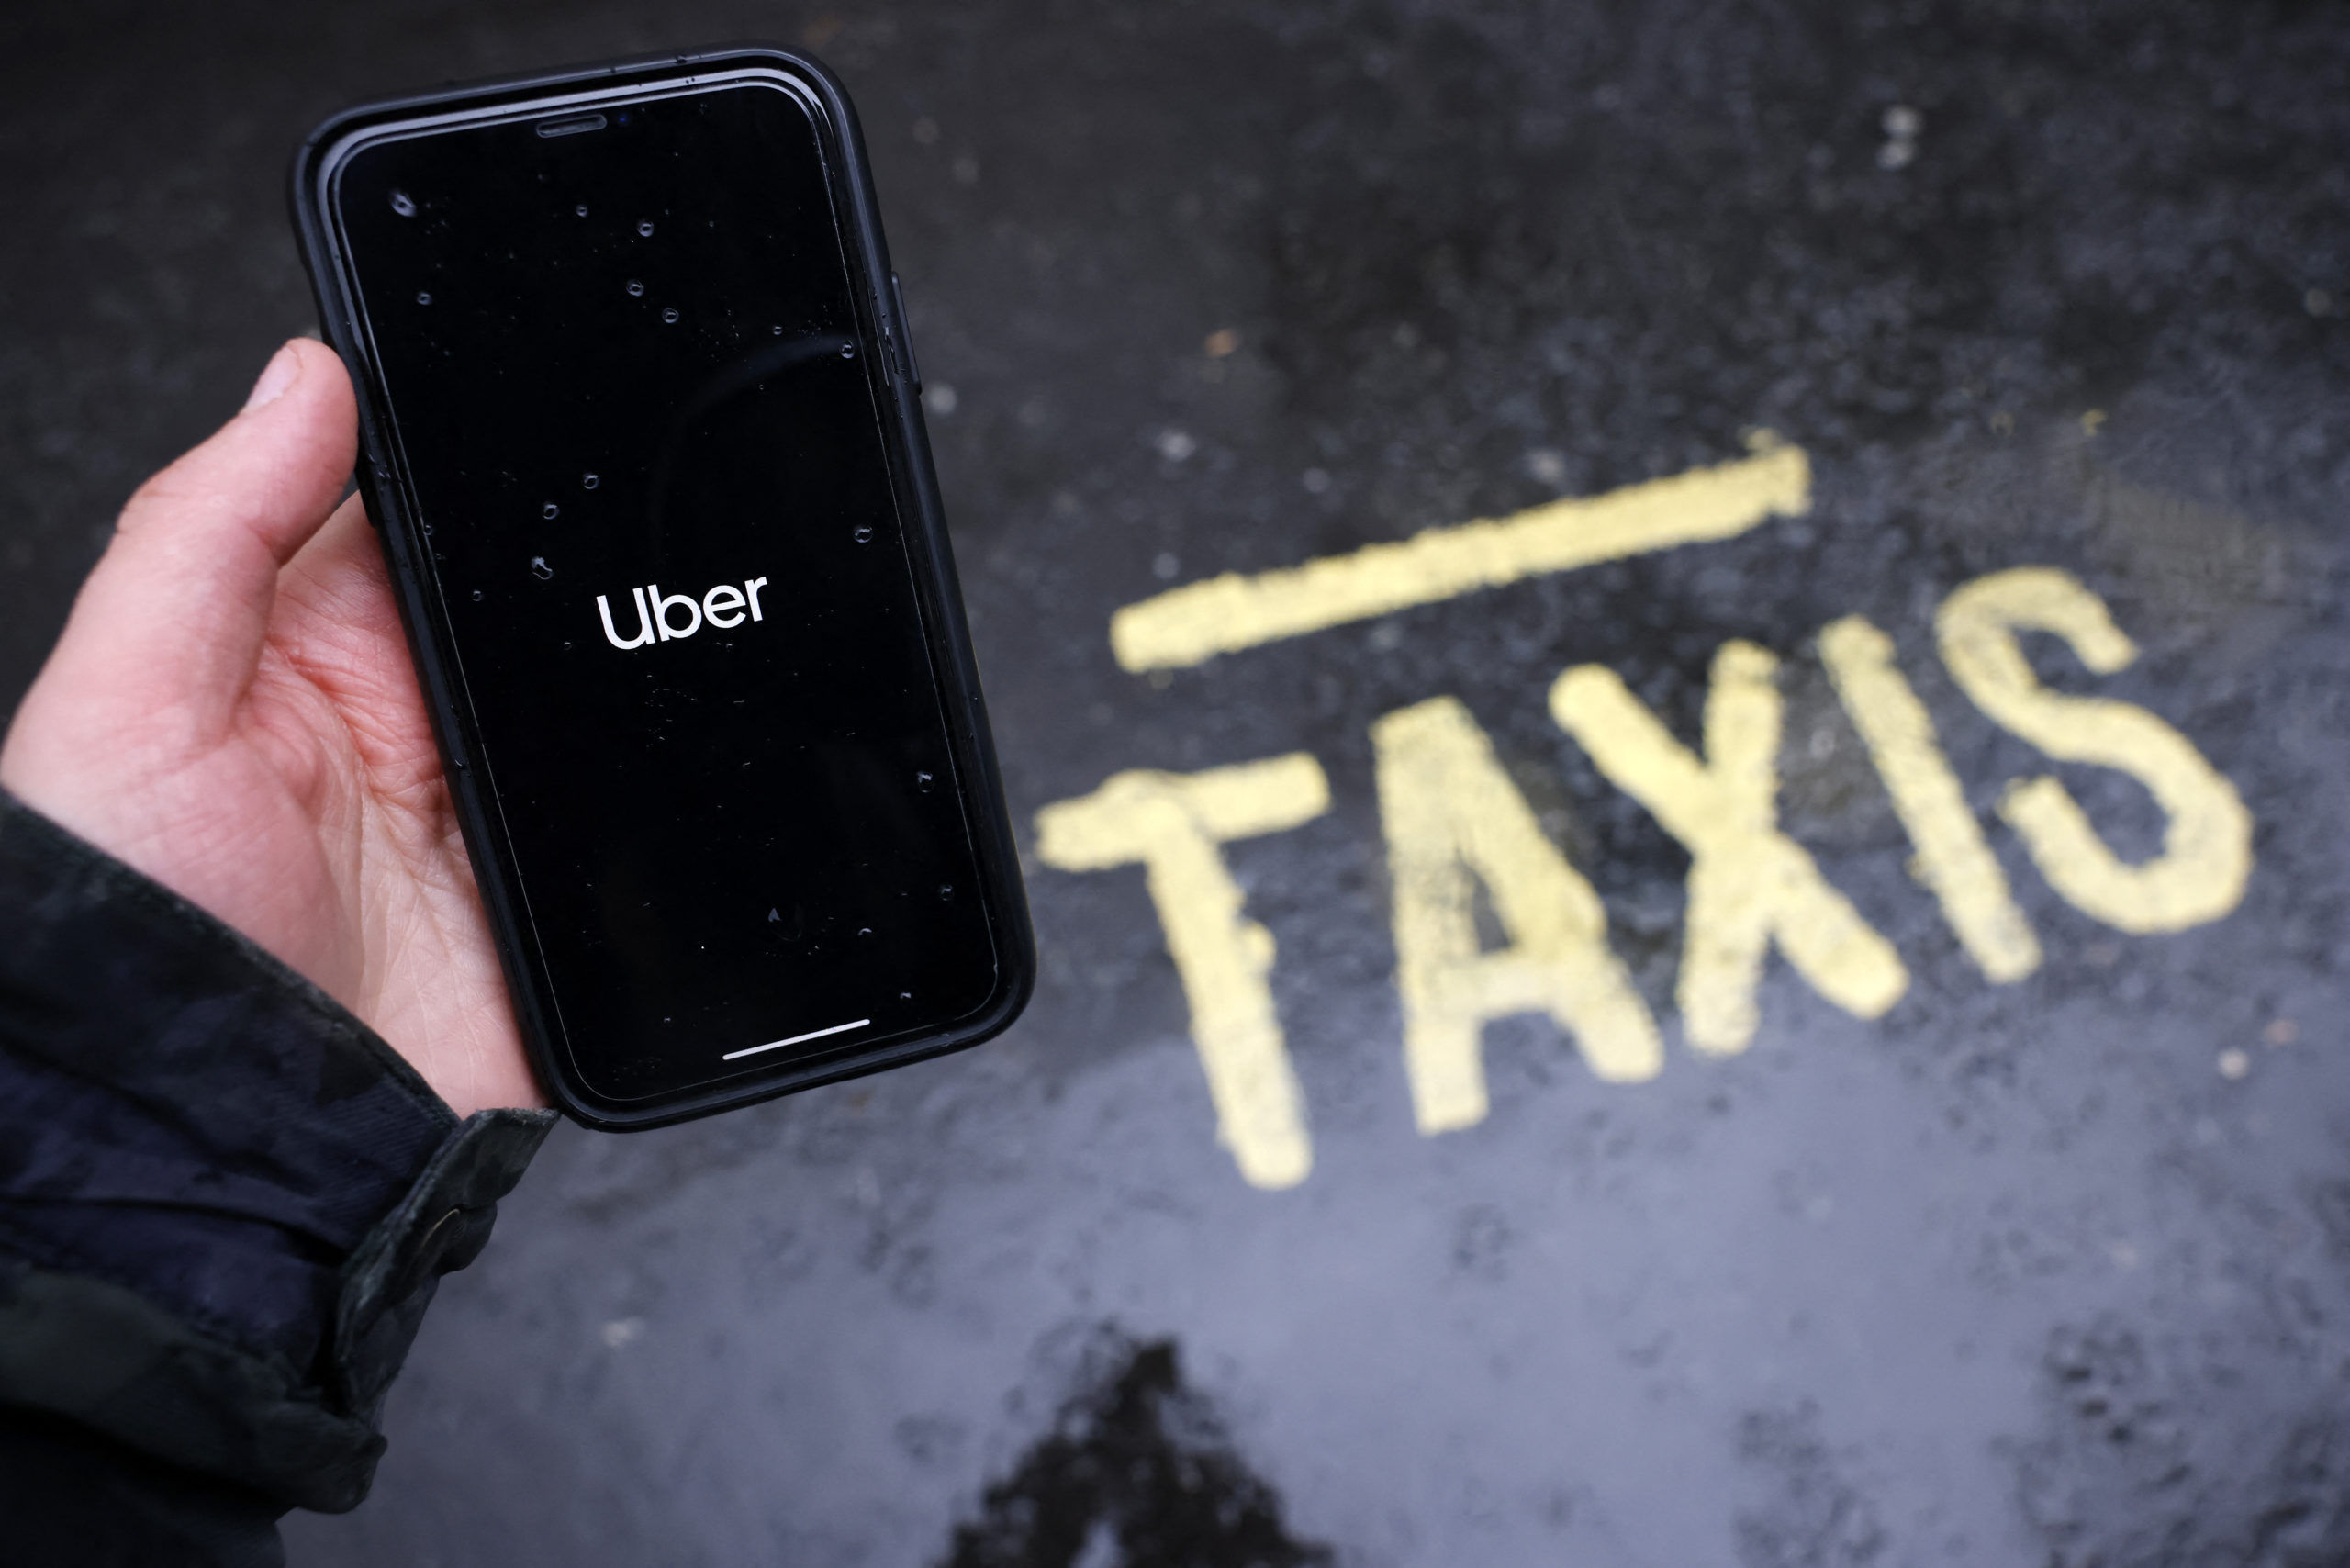 Brussels taxi sector ‘ready to hire 600 Uber drivers’